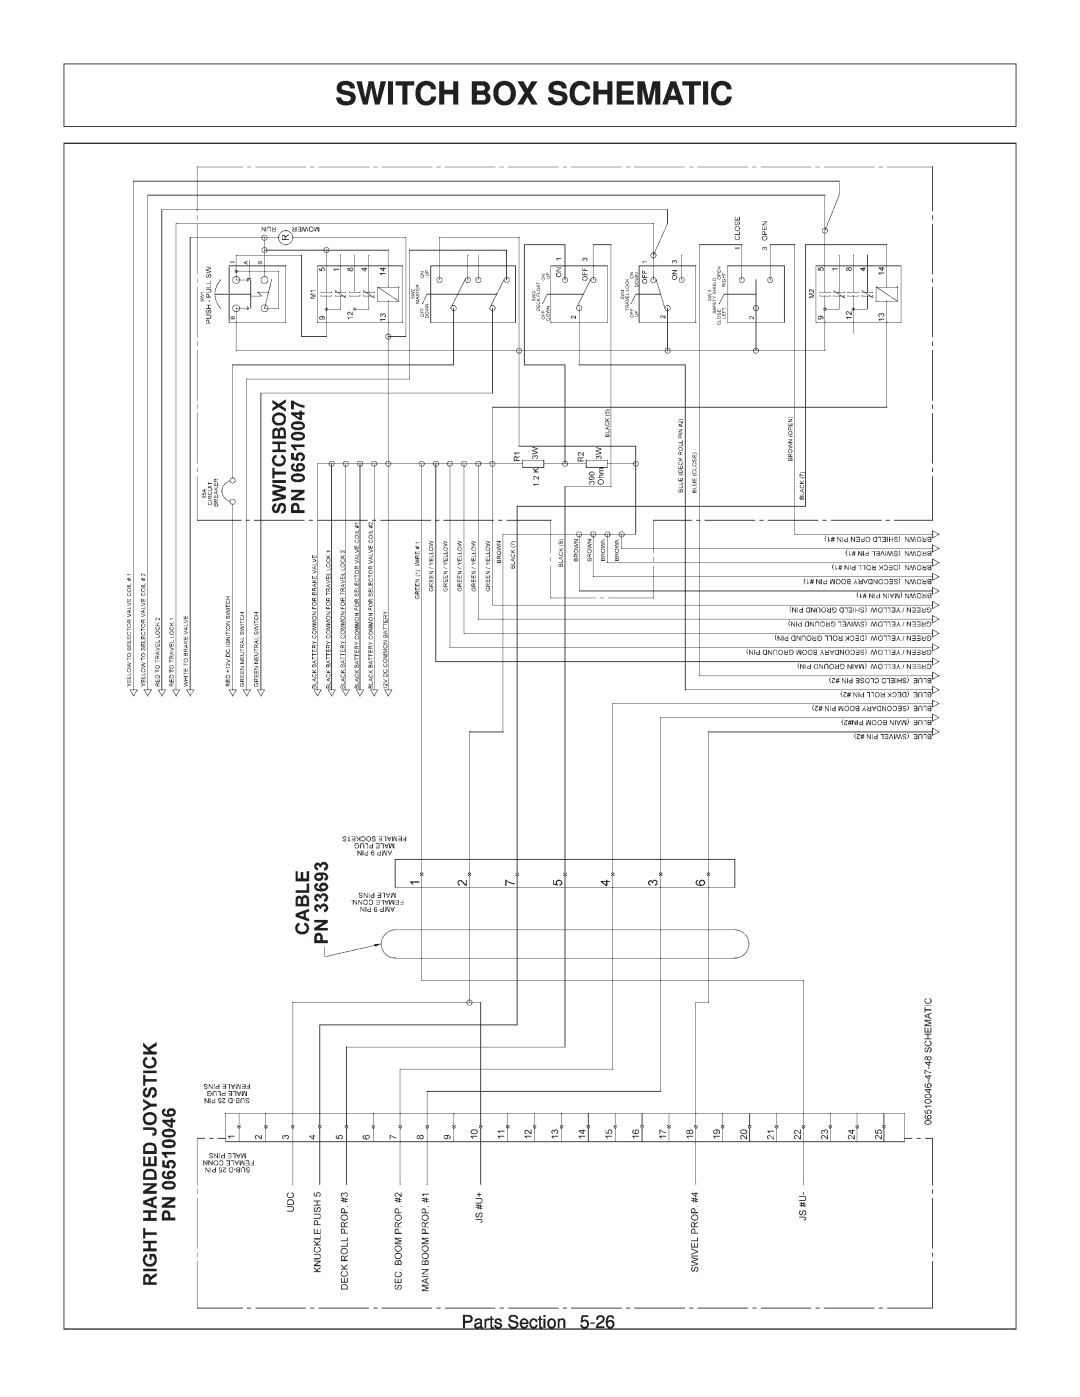 Tiger JD 62-6420 manual Switch Box Schematic, Parts Section 